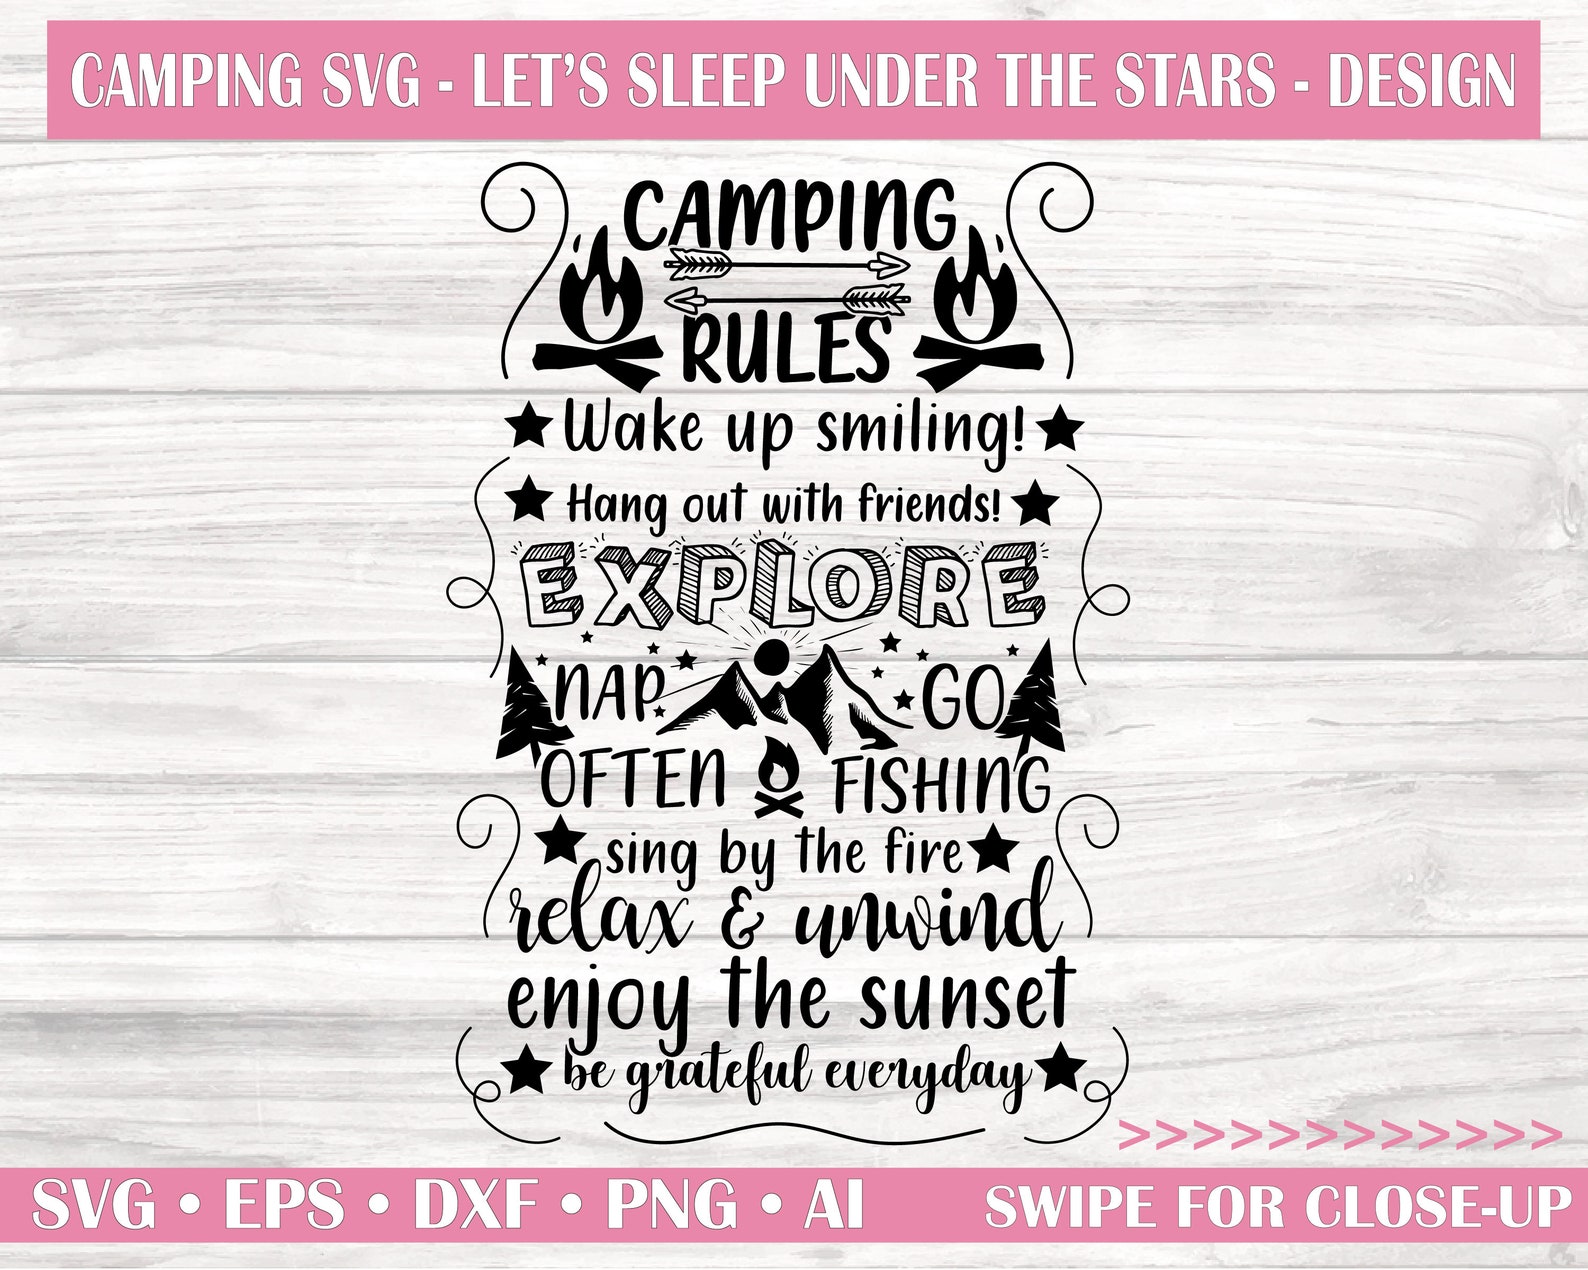 Camping rules. Campsite Rules. Rules svg.